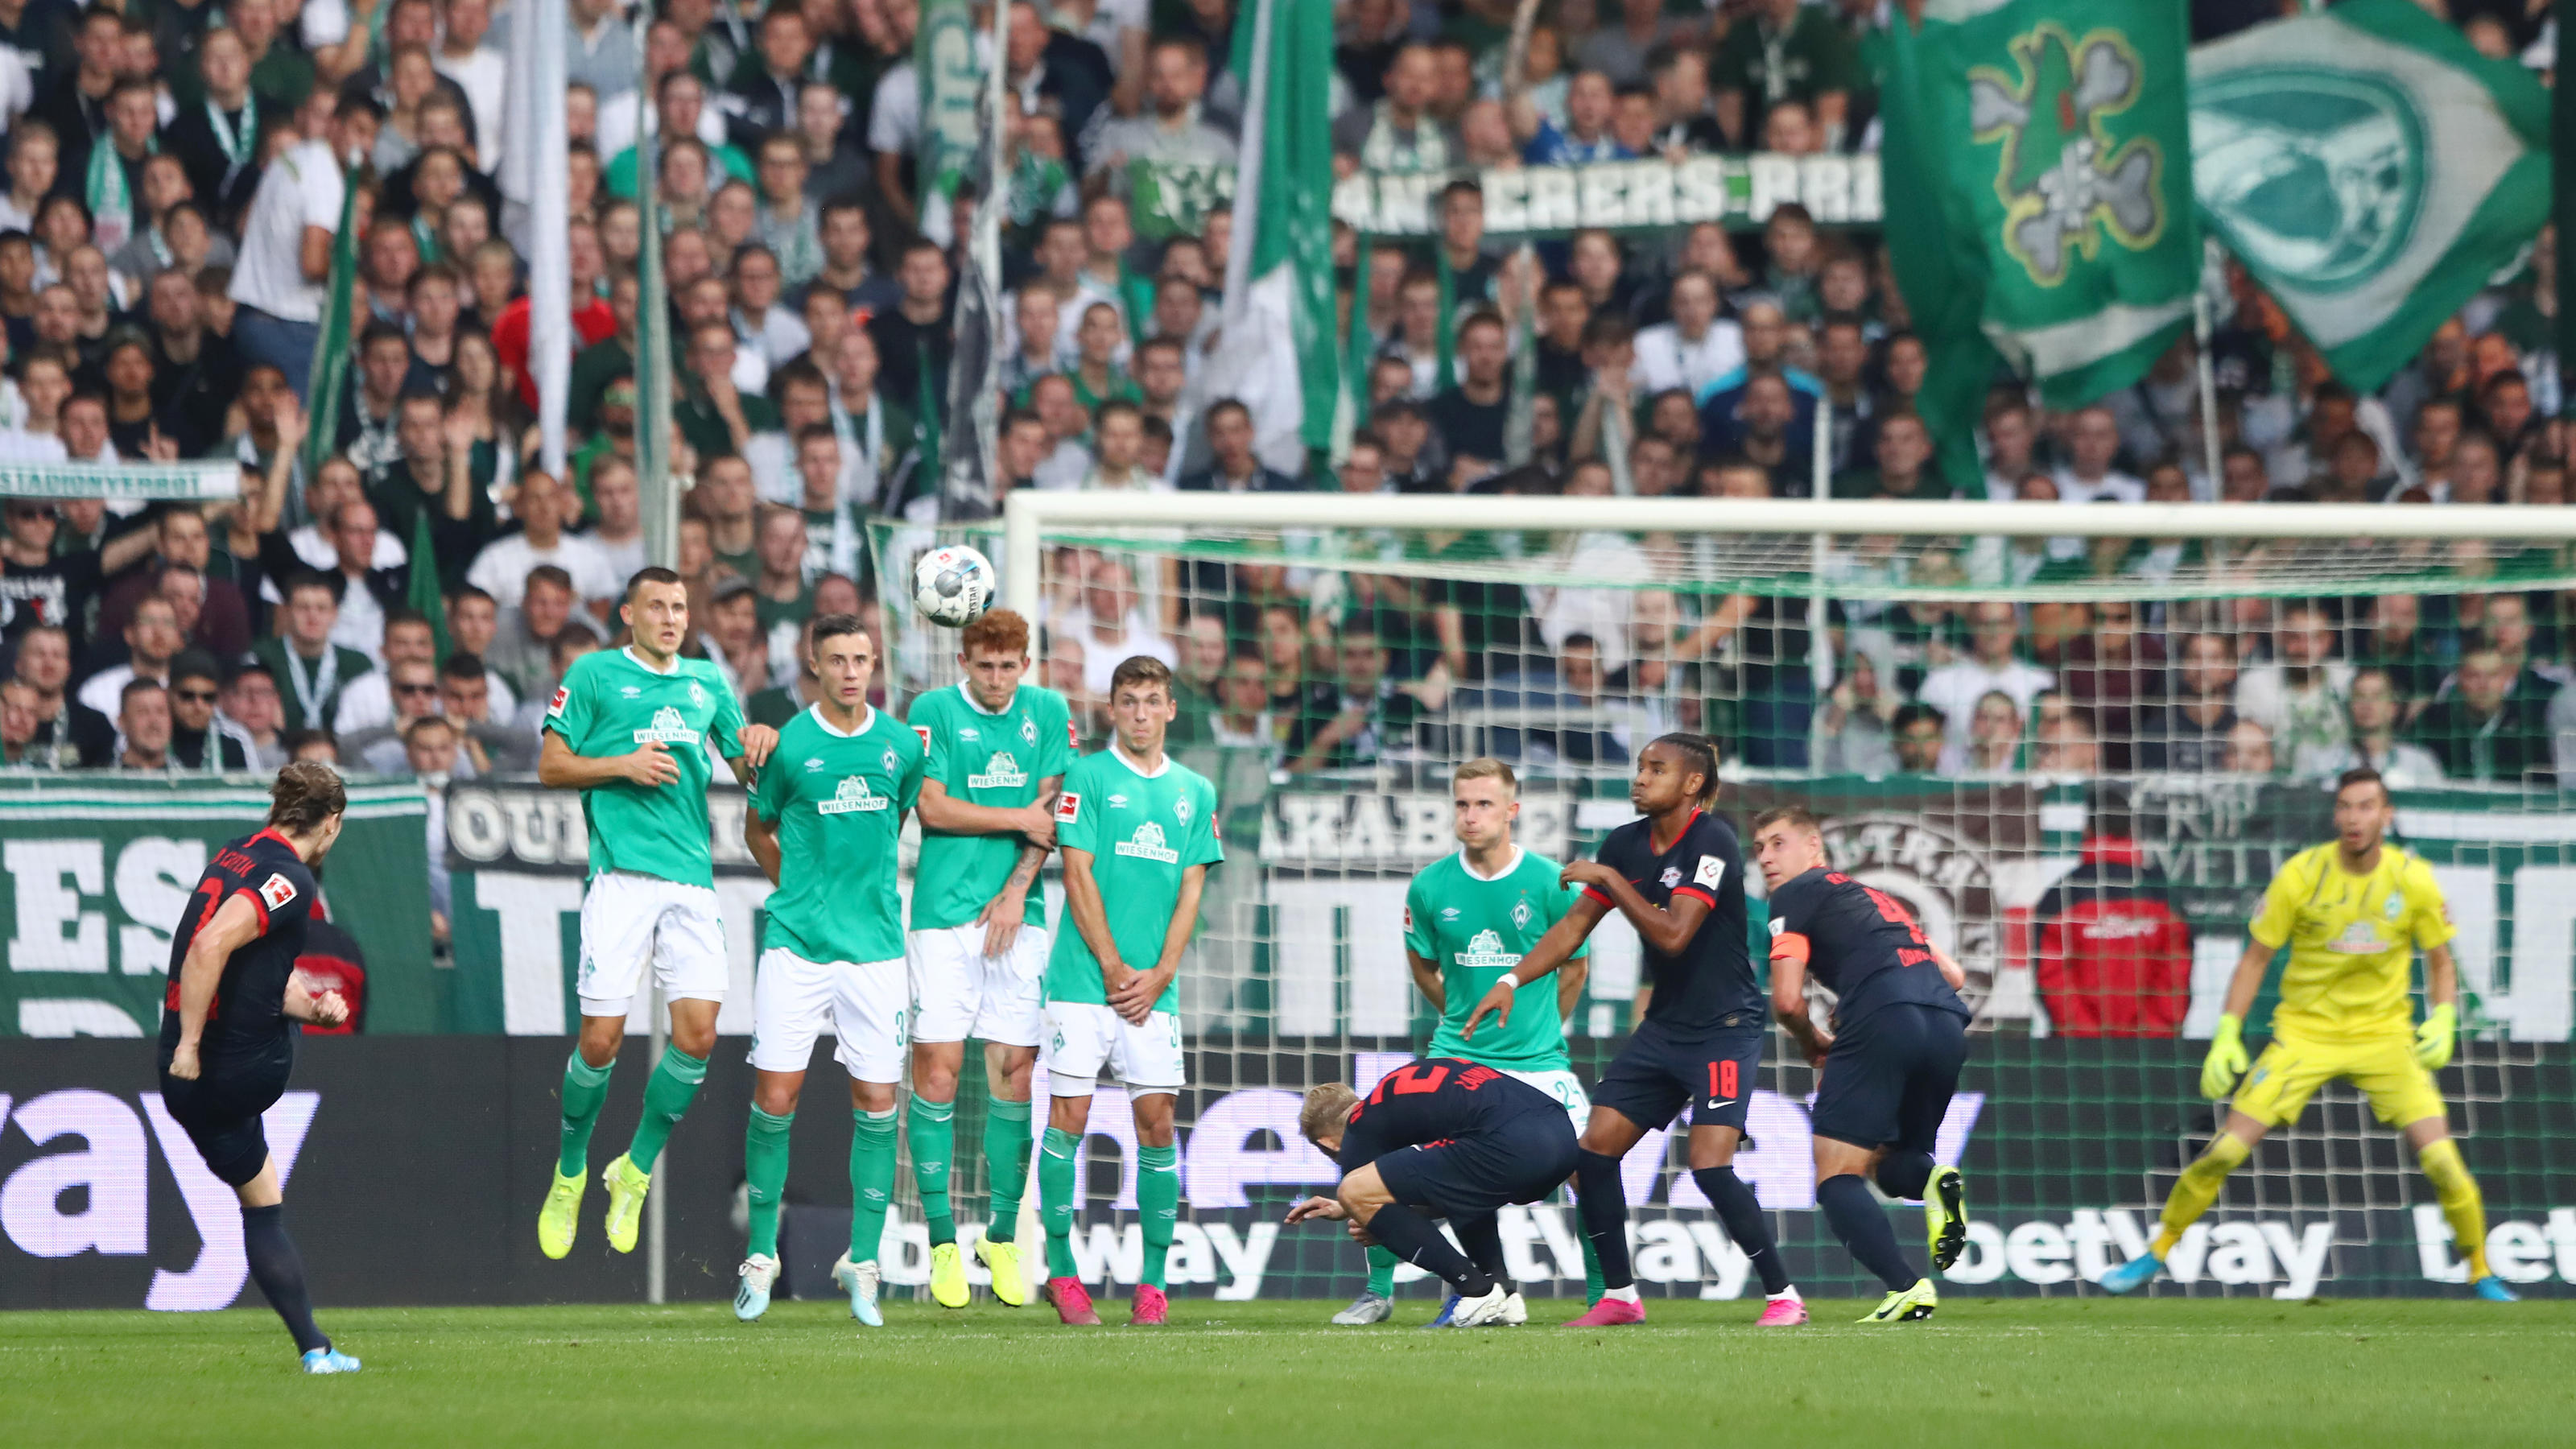 BREMEN, GERMANY - SEPTEMBER 21: Marcel Sabitzer of RB Leipzig (7) scores his team's second goal from a free kick during the Bundesliga match between SV Werder Bremen and RB Leipzig at Wohninvest Weserstadion on September 21, 2019 in Bremen, Germany. 